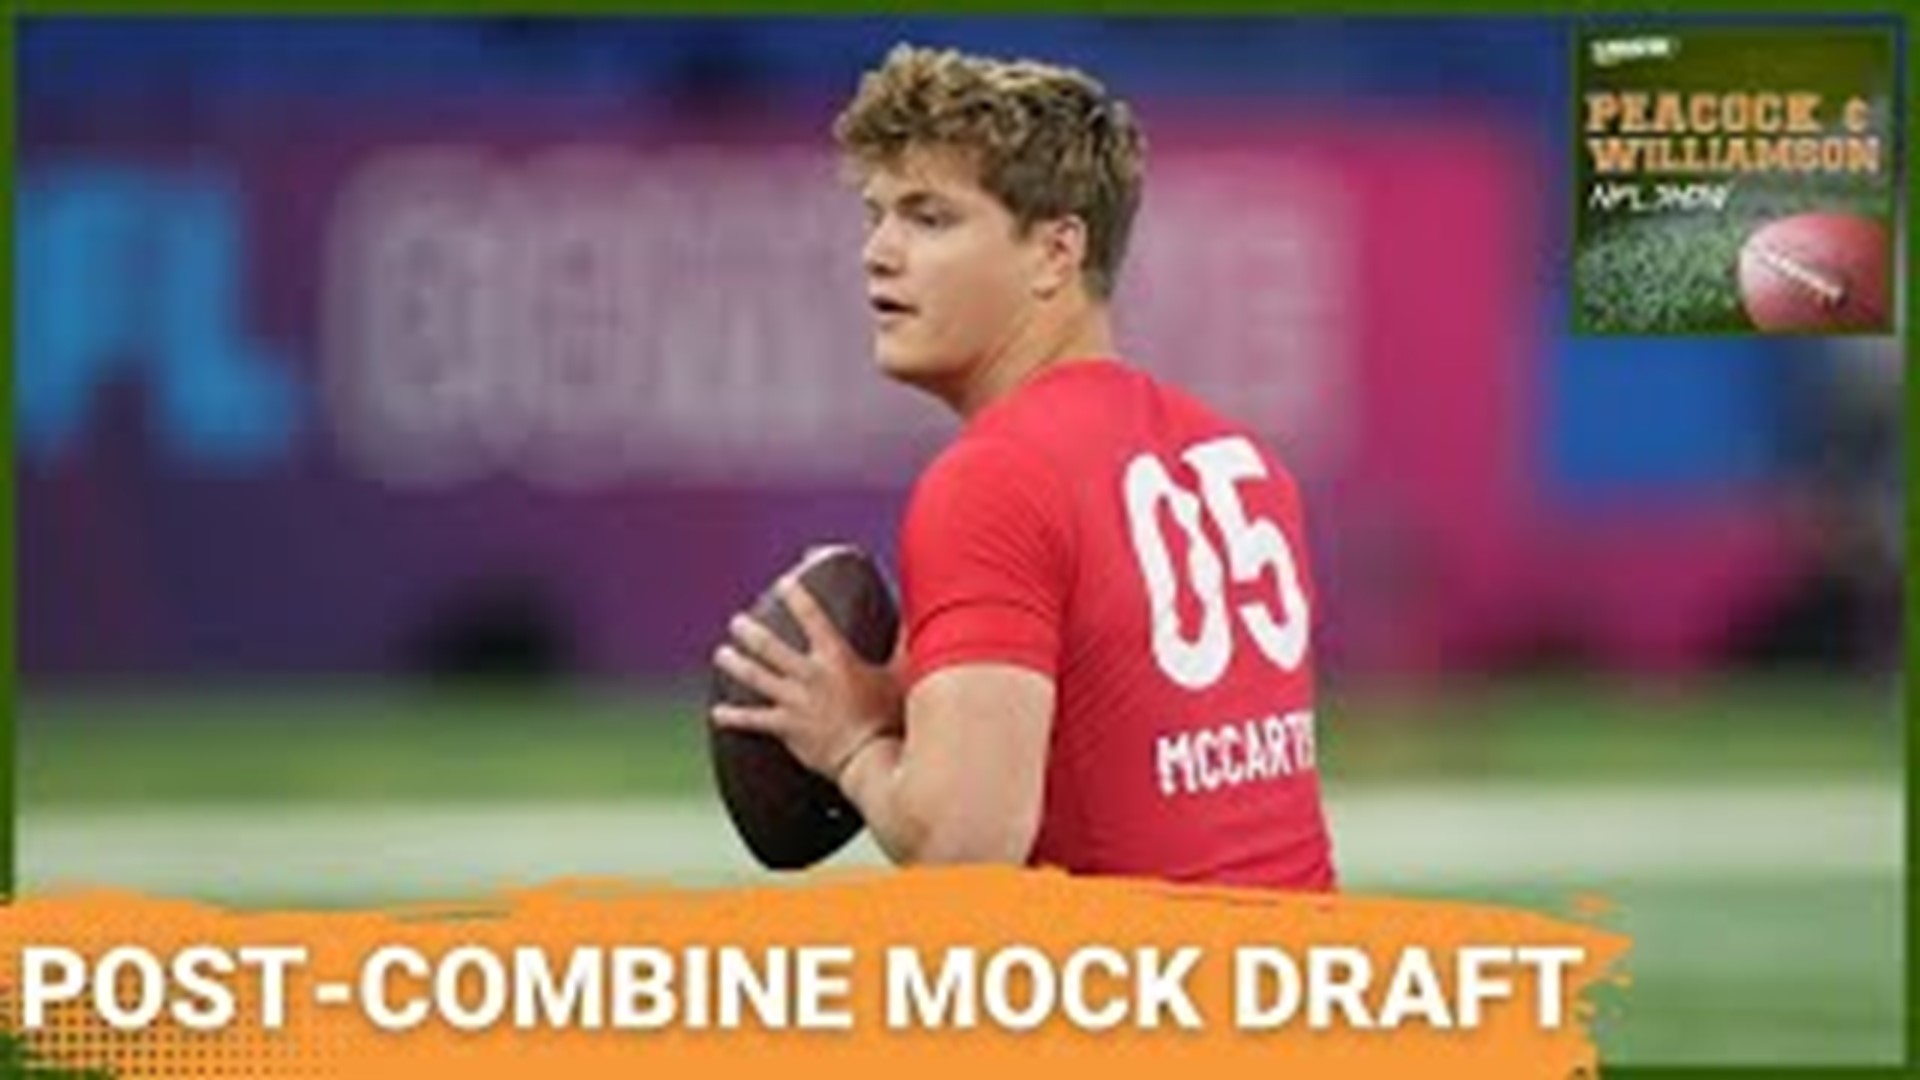 Matt Williamson's Mock Draft 2.0! What has changed since the Combine? Where will the quarterbacks go, including JJ McCarthy? Trade hotspots in the 2024 NFL Draft.